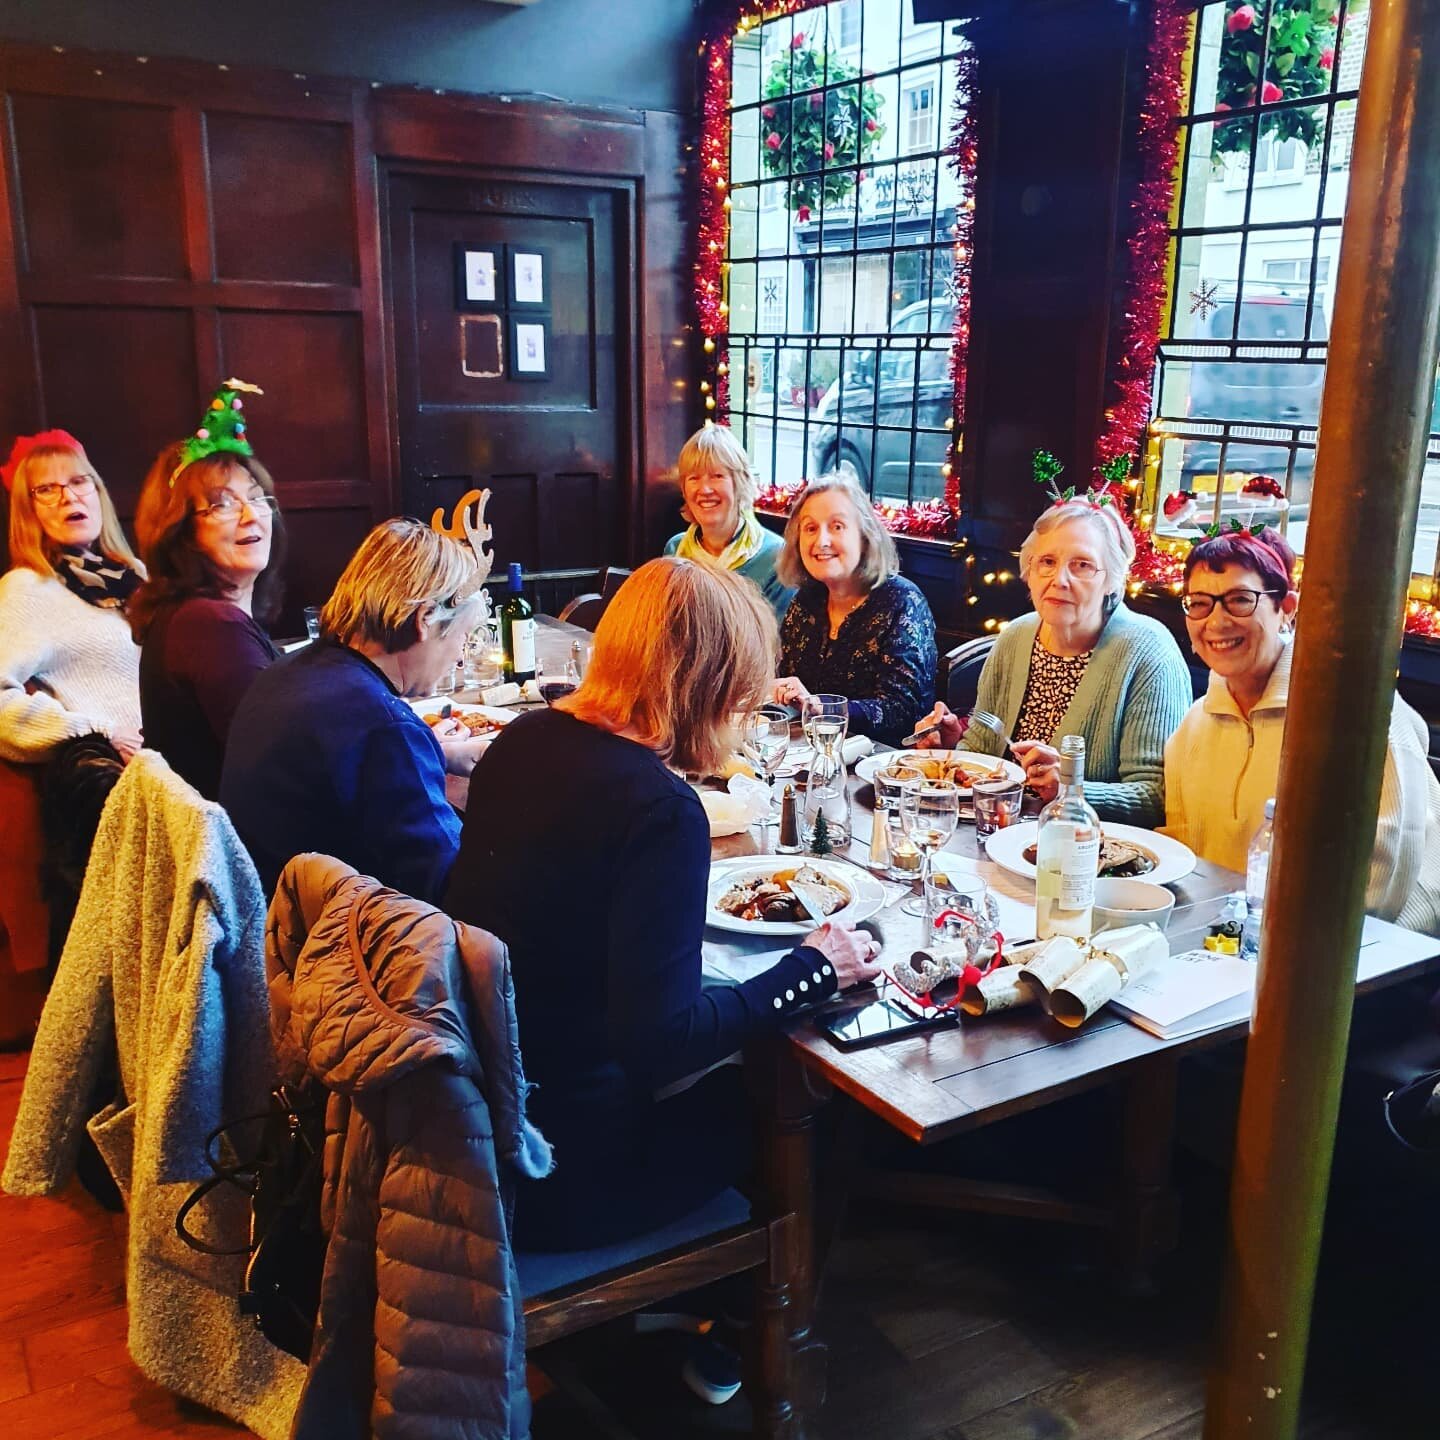 The first Christmas Dinner of 2021 is well underway here @theprincealbert_camden.
Book your party with us, menus and contact details available on our website.

#Christmas #camdentown